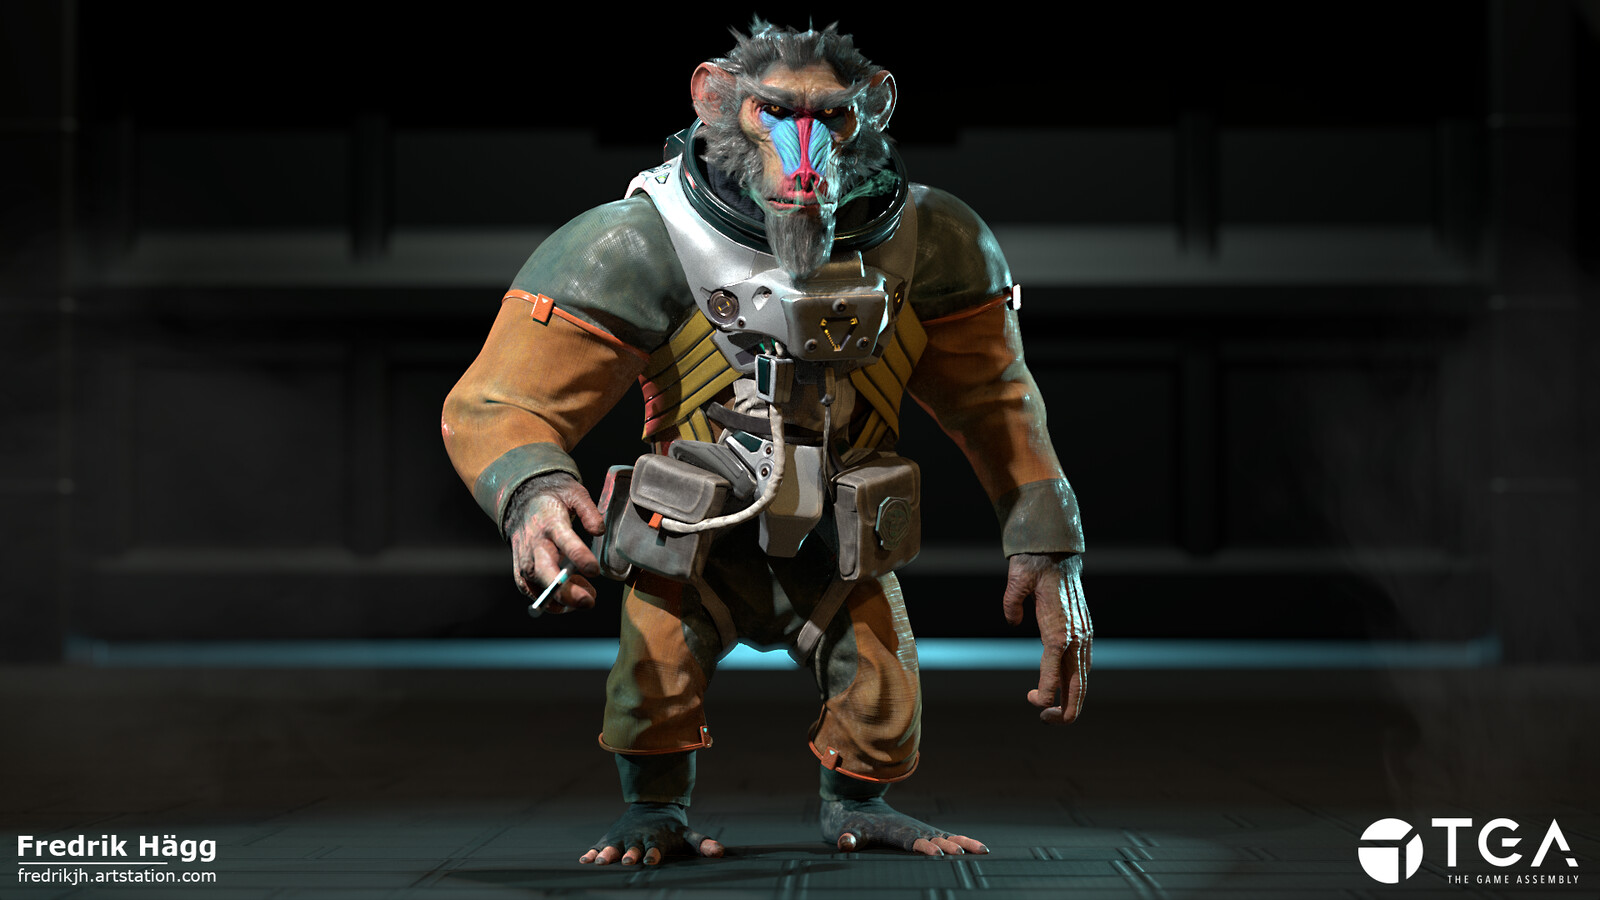 In an eclectic and colorful future, a graying primate lives a vagrant lifestyle travelling between space-docks taking odd jobs.